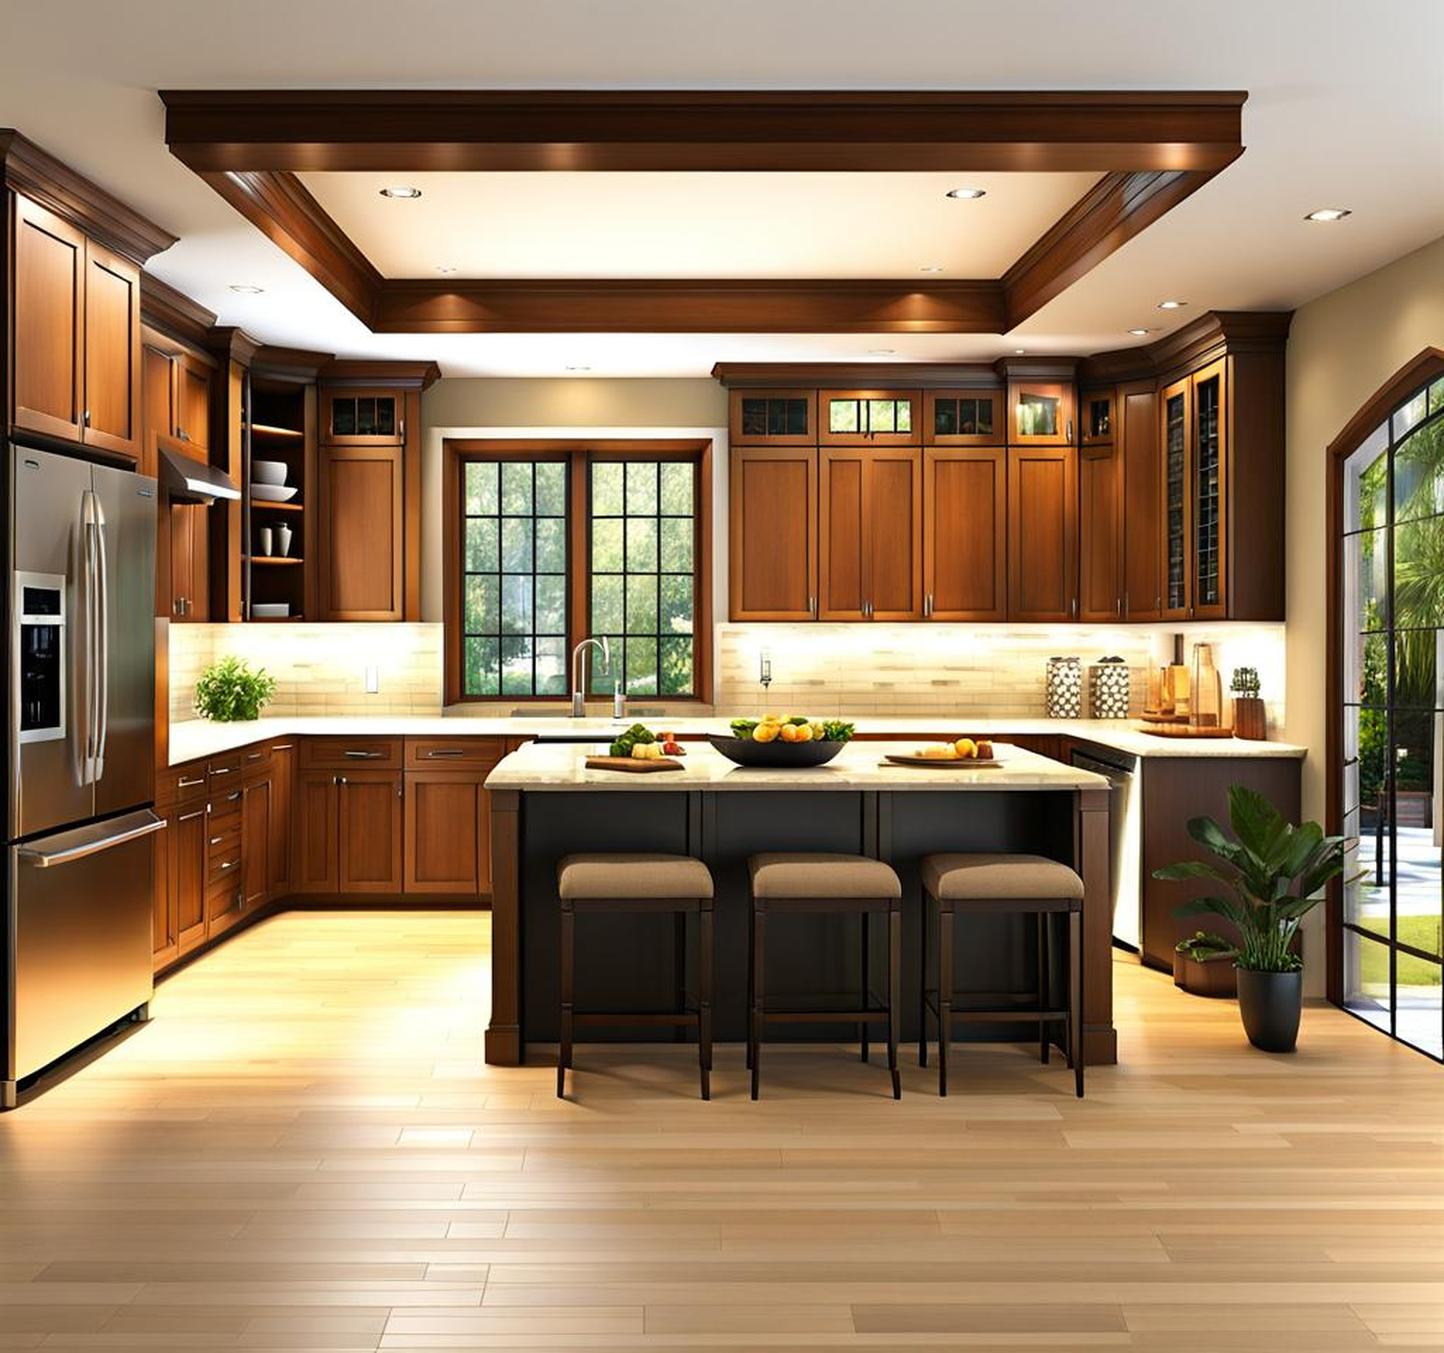 kitchen floor plans with island and walk in pantry